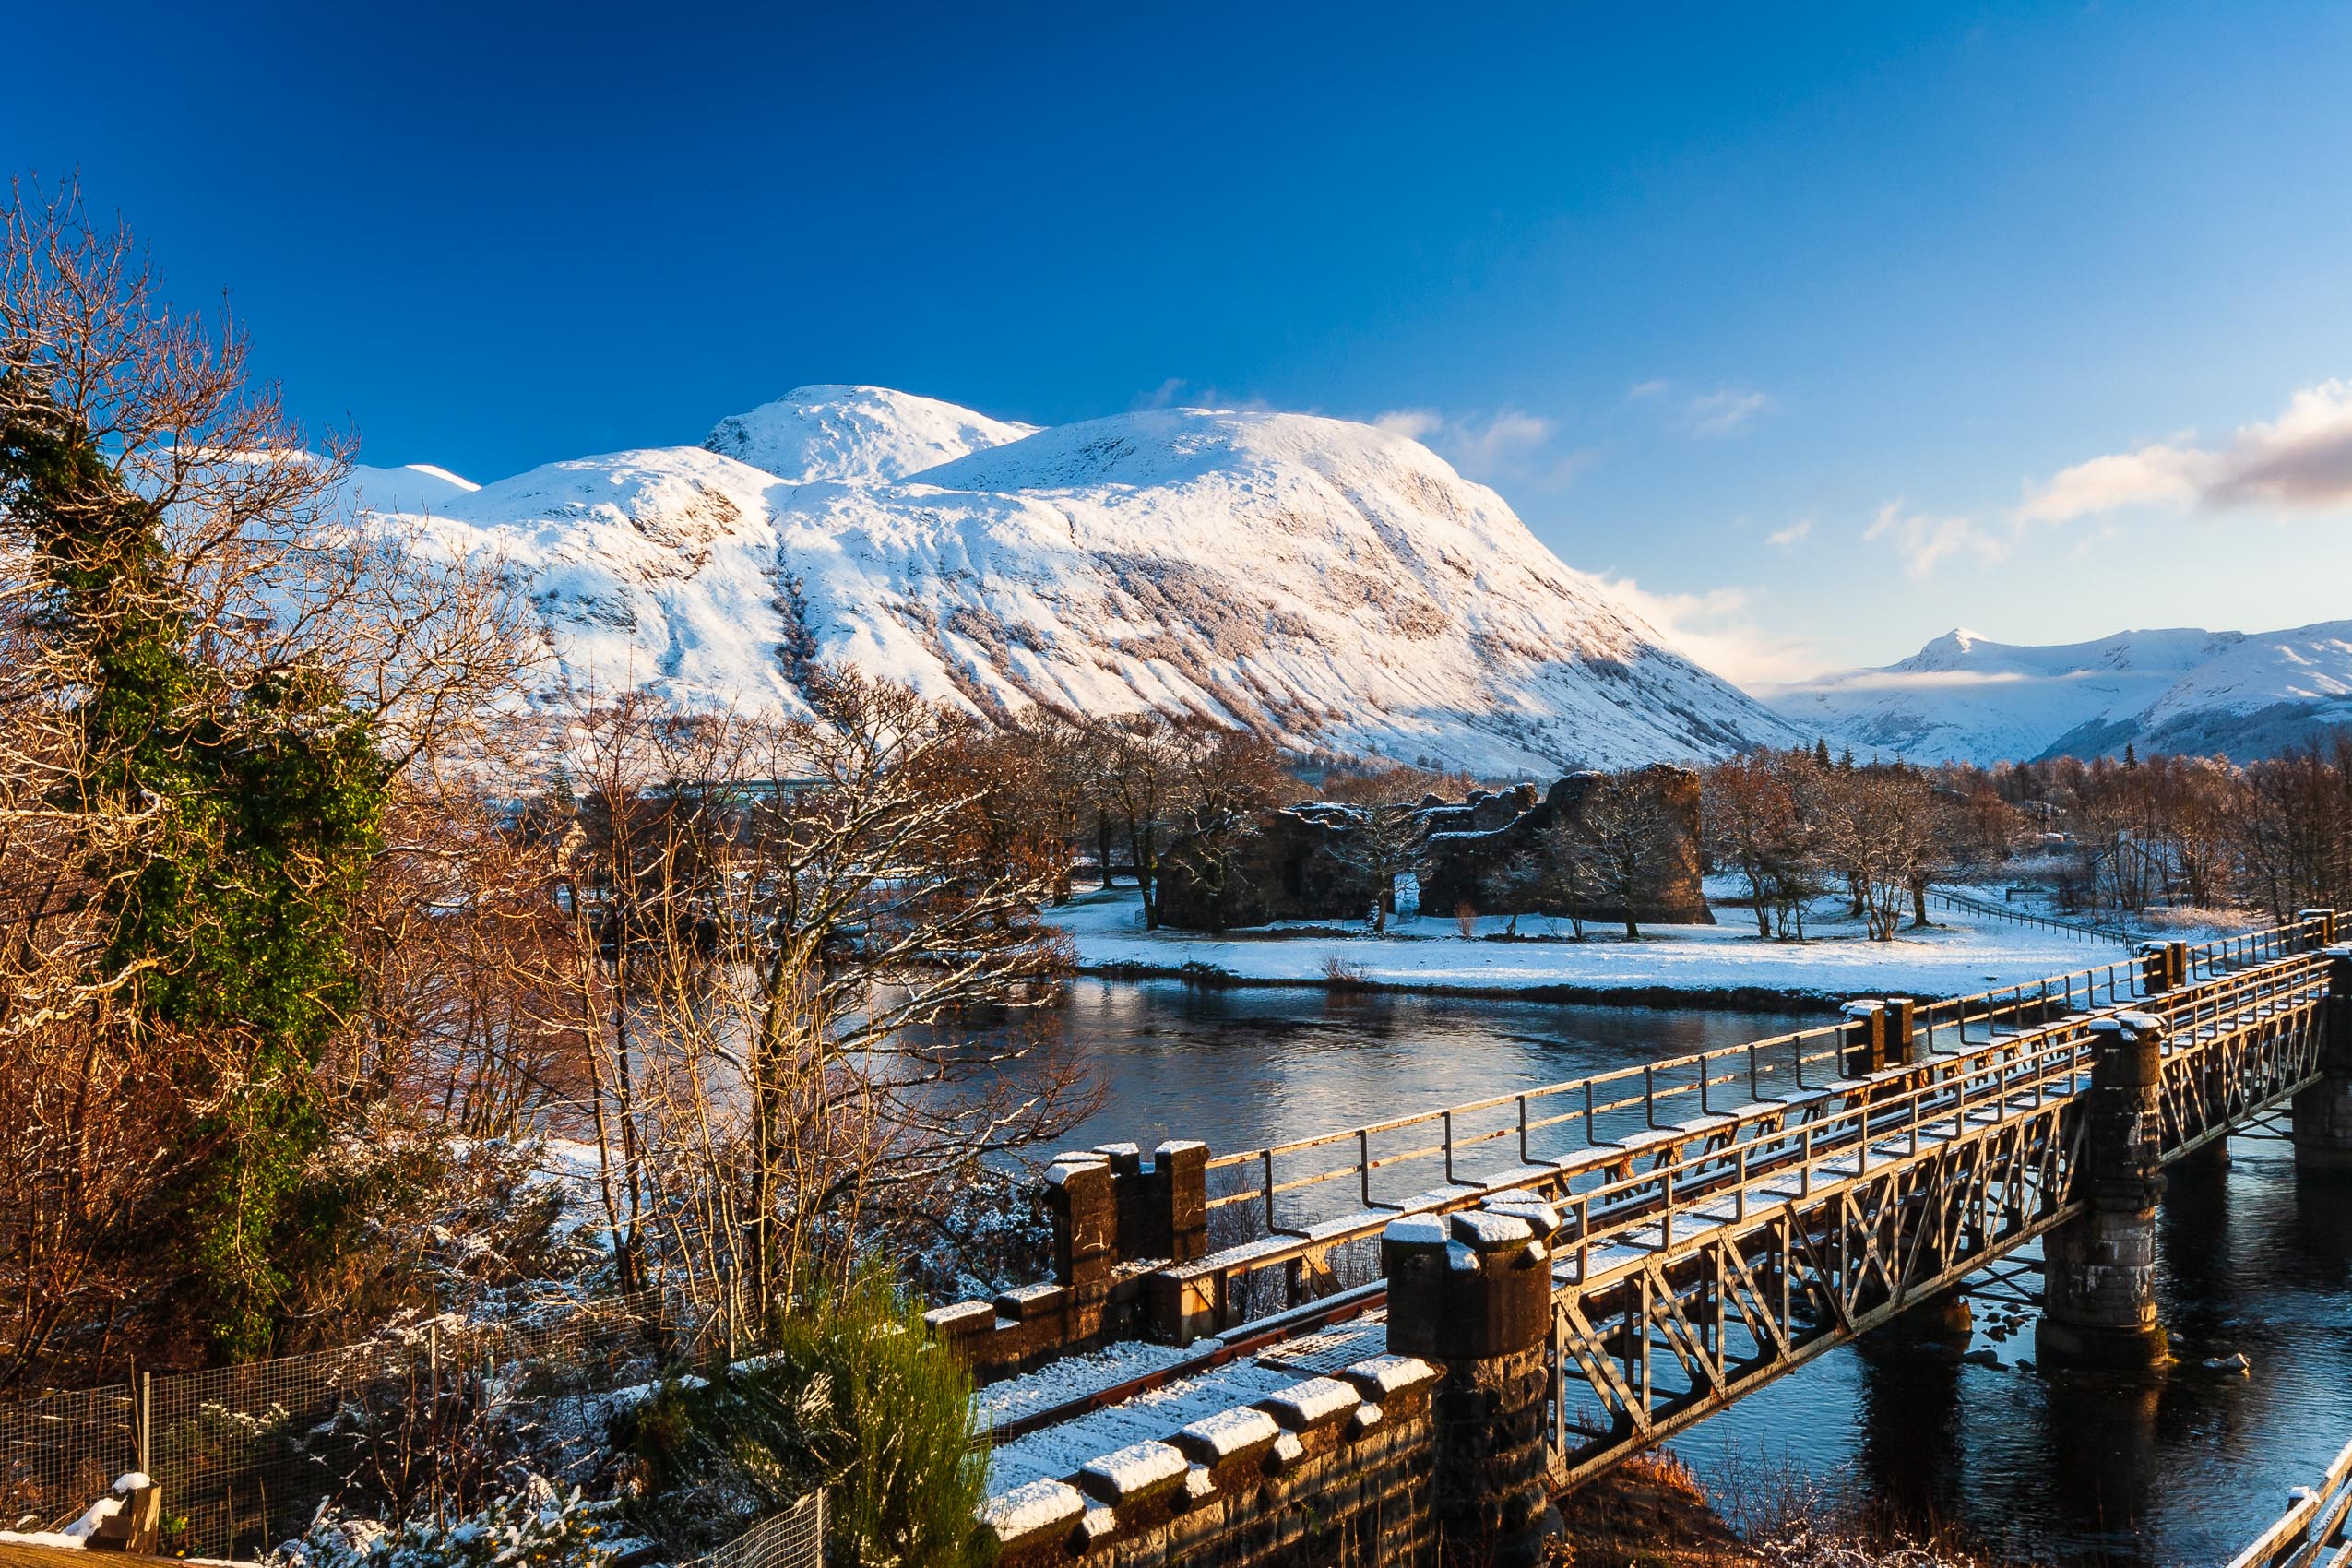 Ben Nevis and the railway bridge carrying the Mallaig Line over the River Lochy, Scotland. HC034